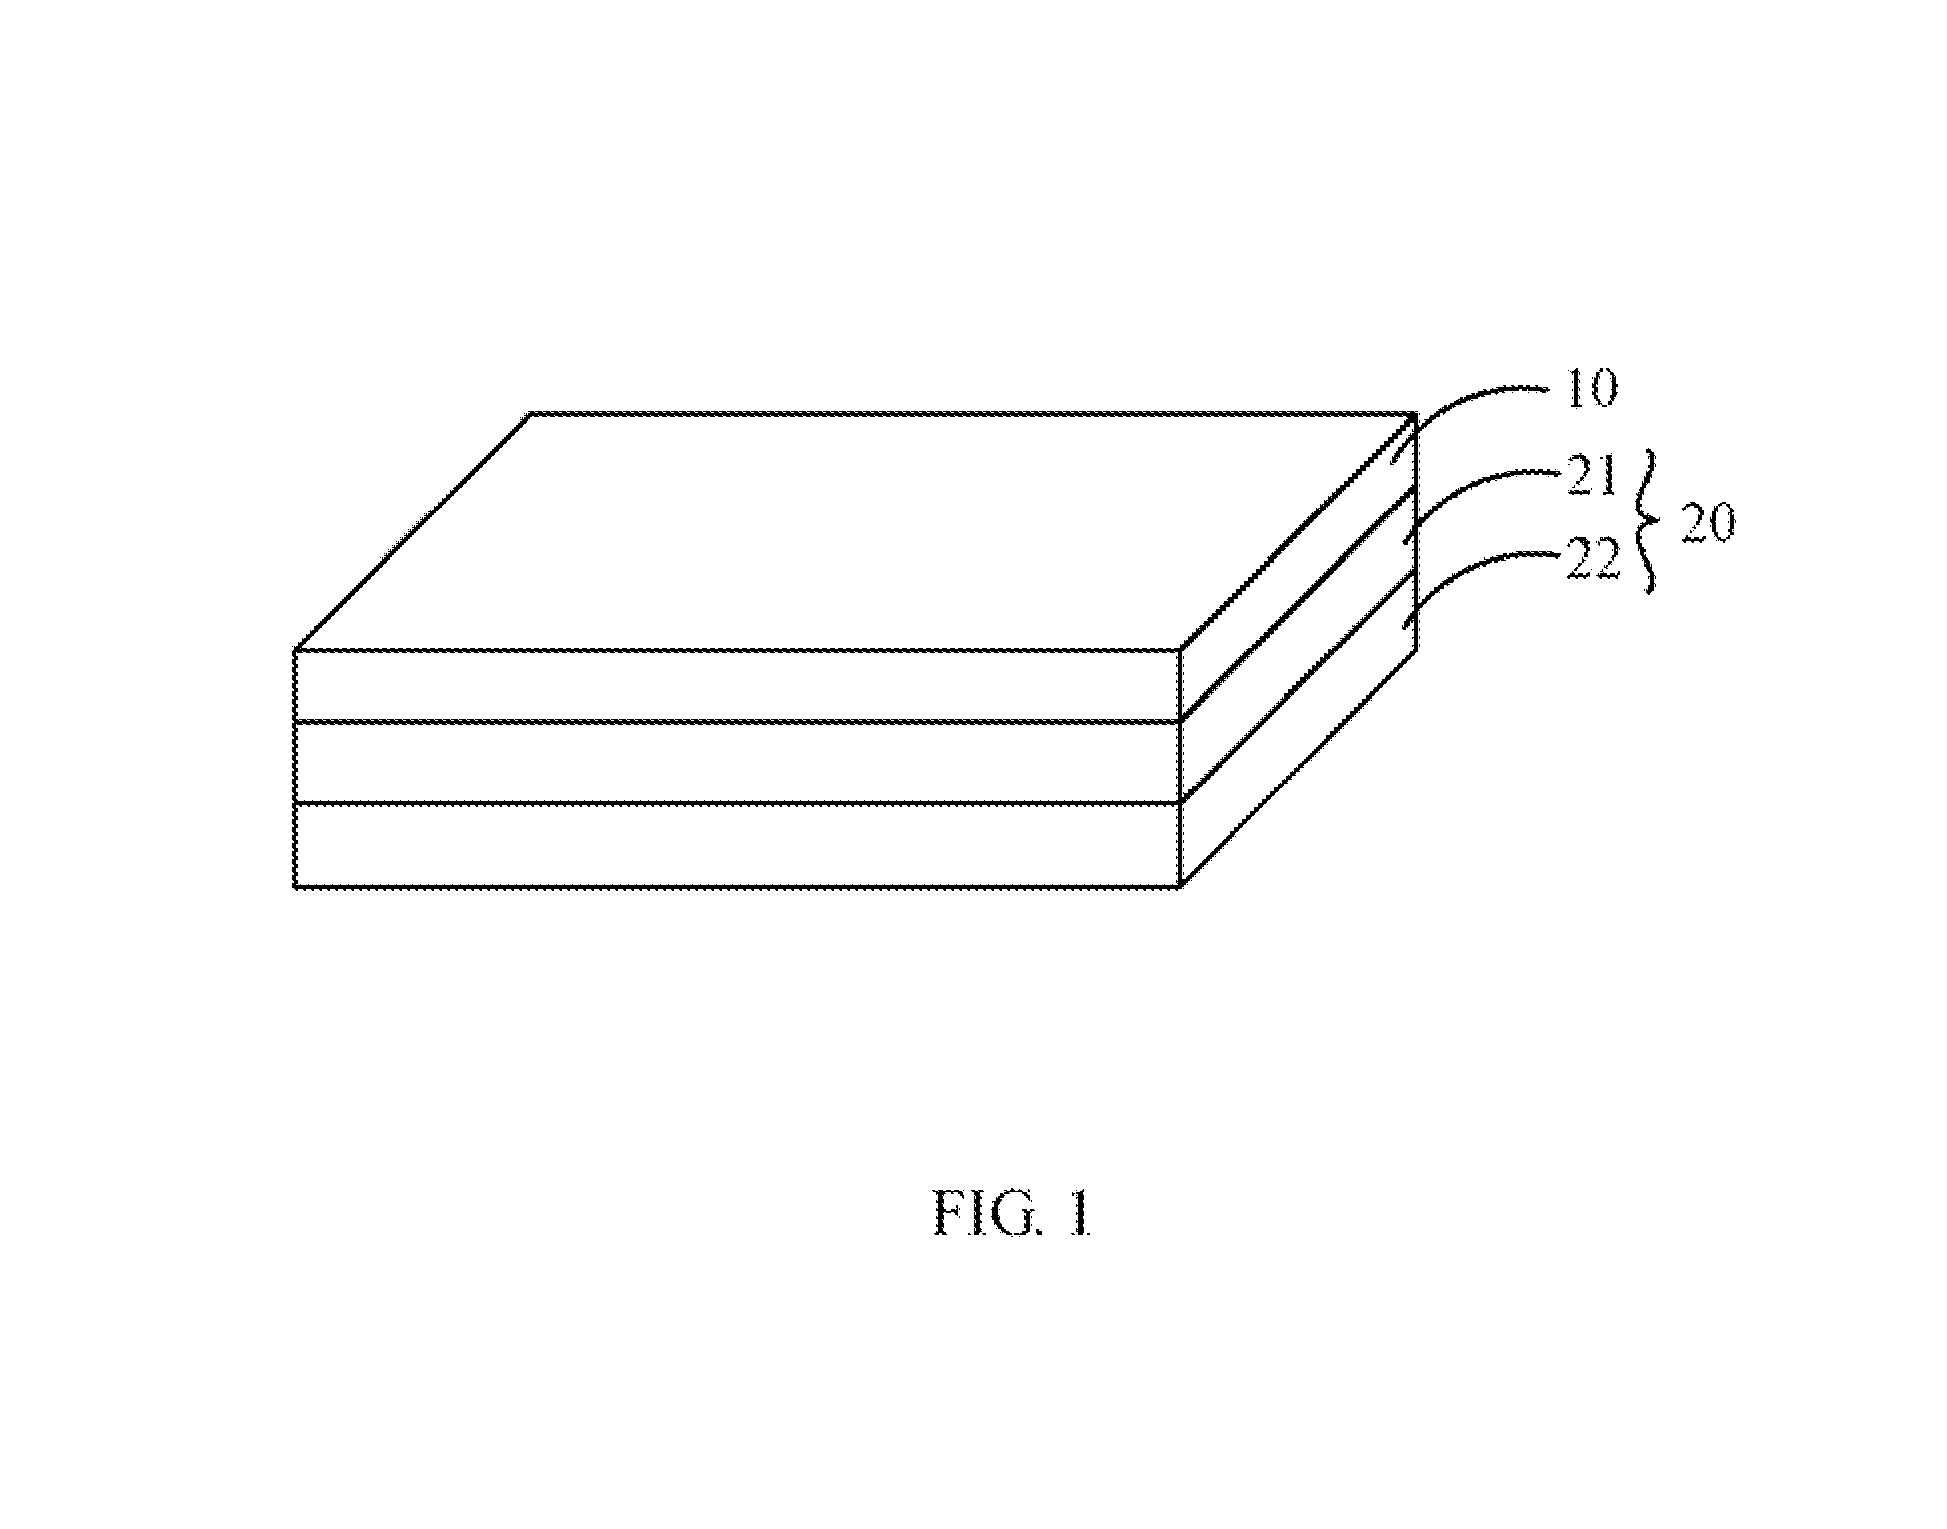 Electronic device and method for providing tactile stimulation